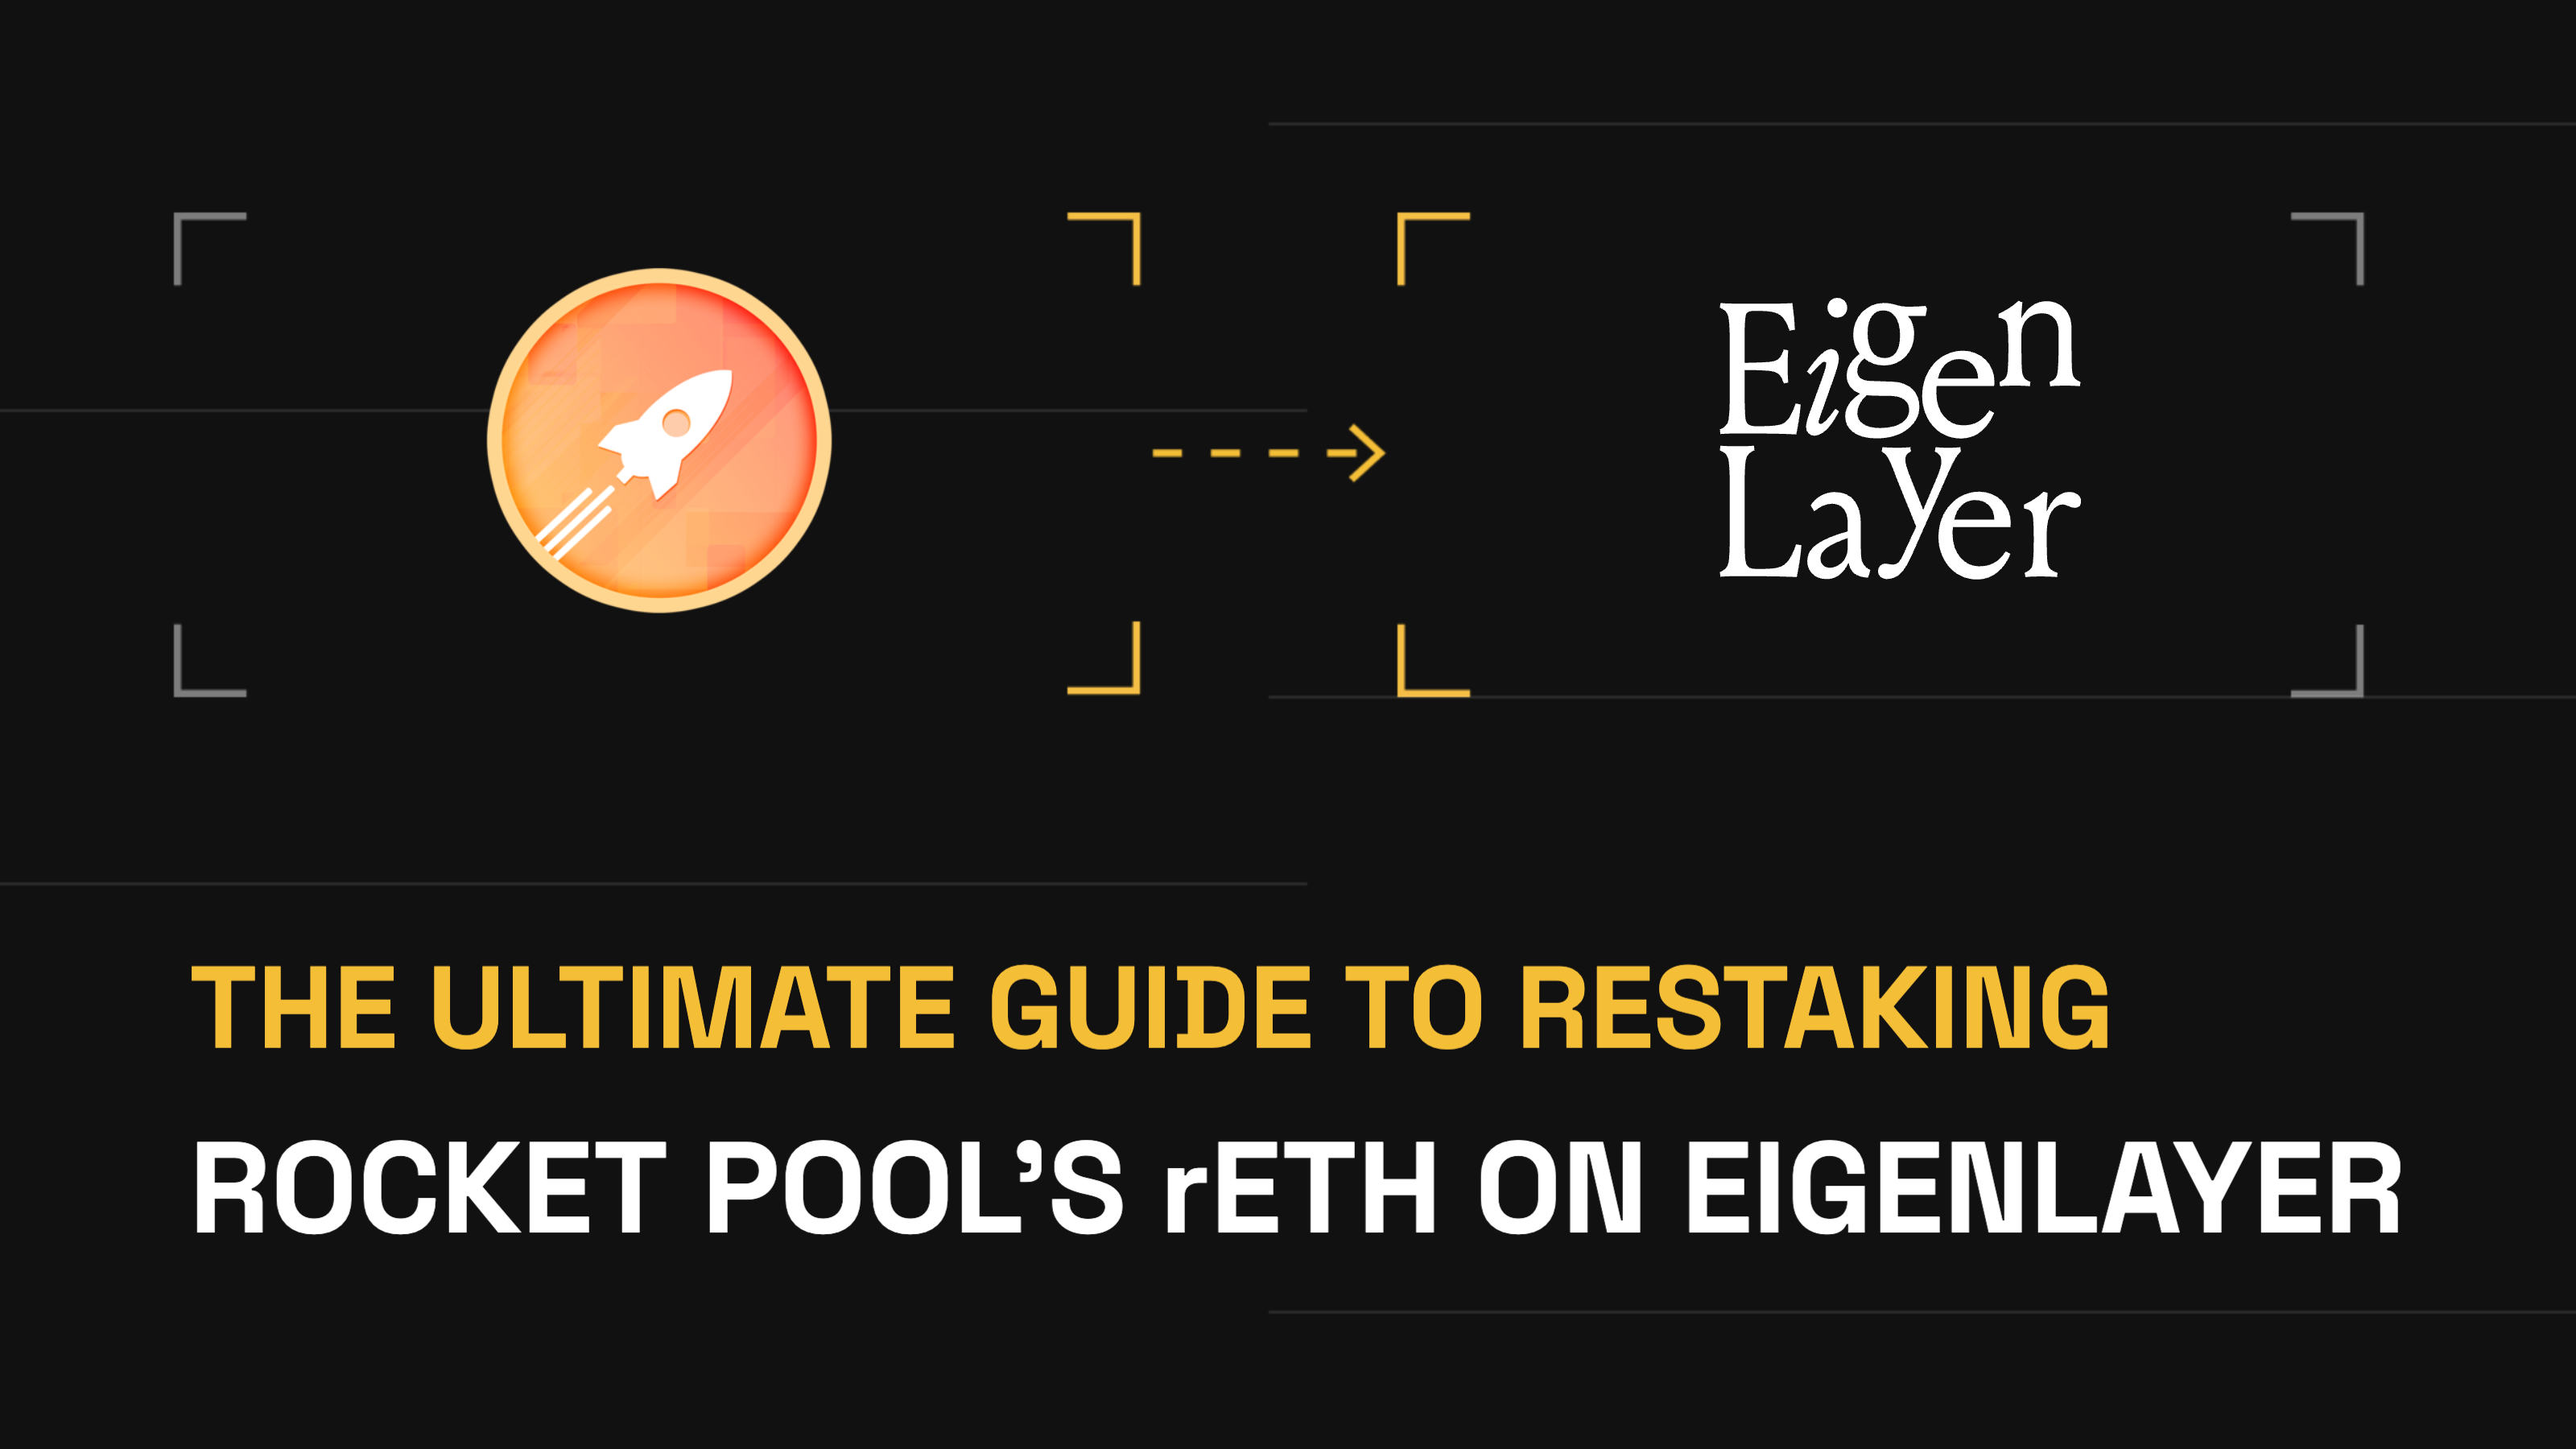 How to Restake and Delegate Rocket Pool’s LST on EigenLayer: a Step-by-Step Guide